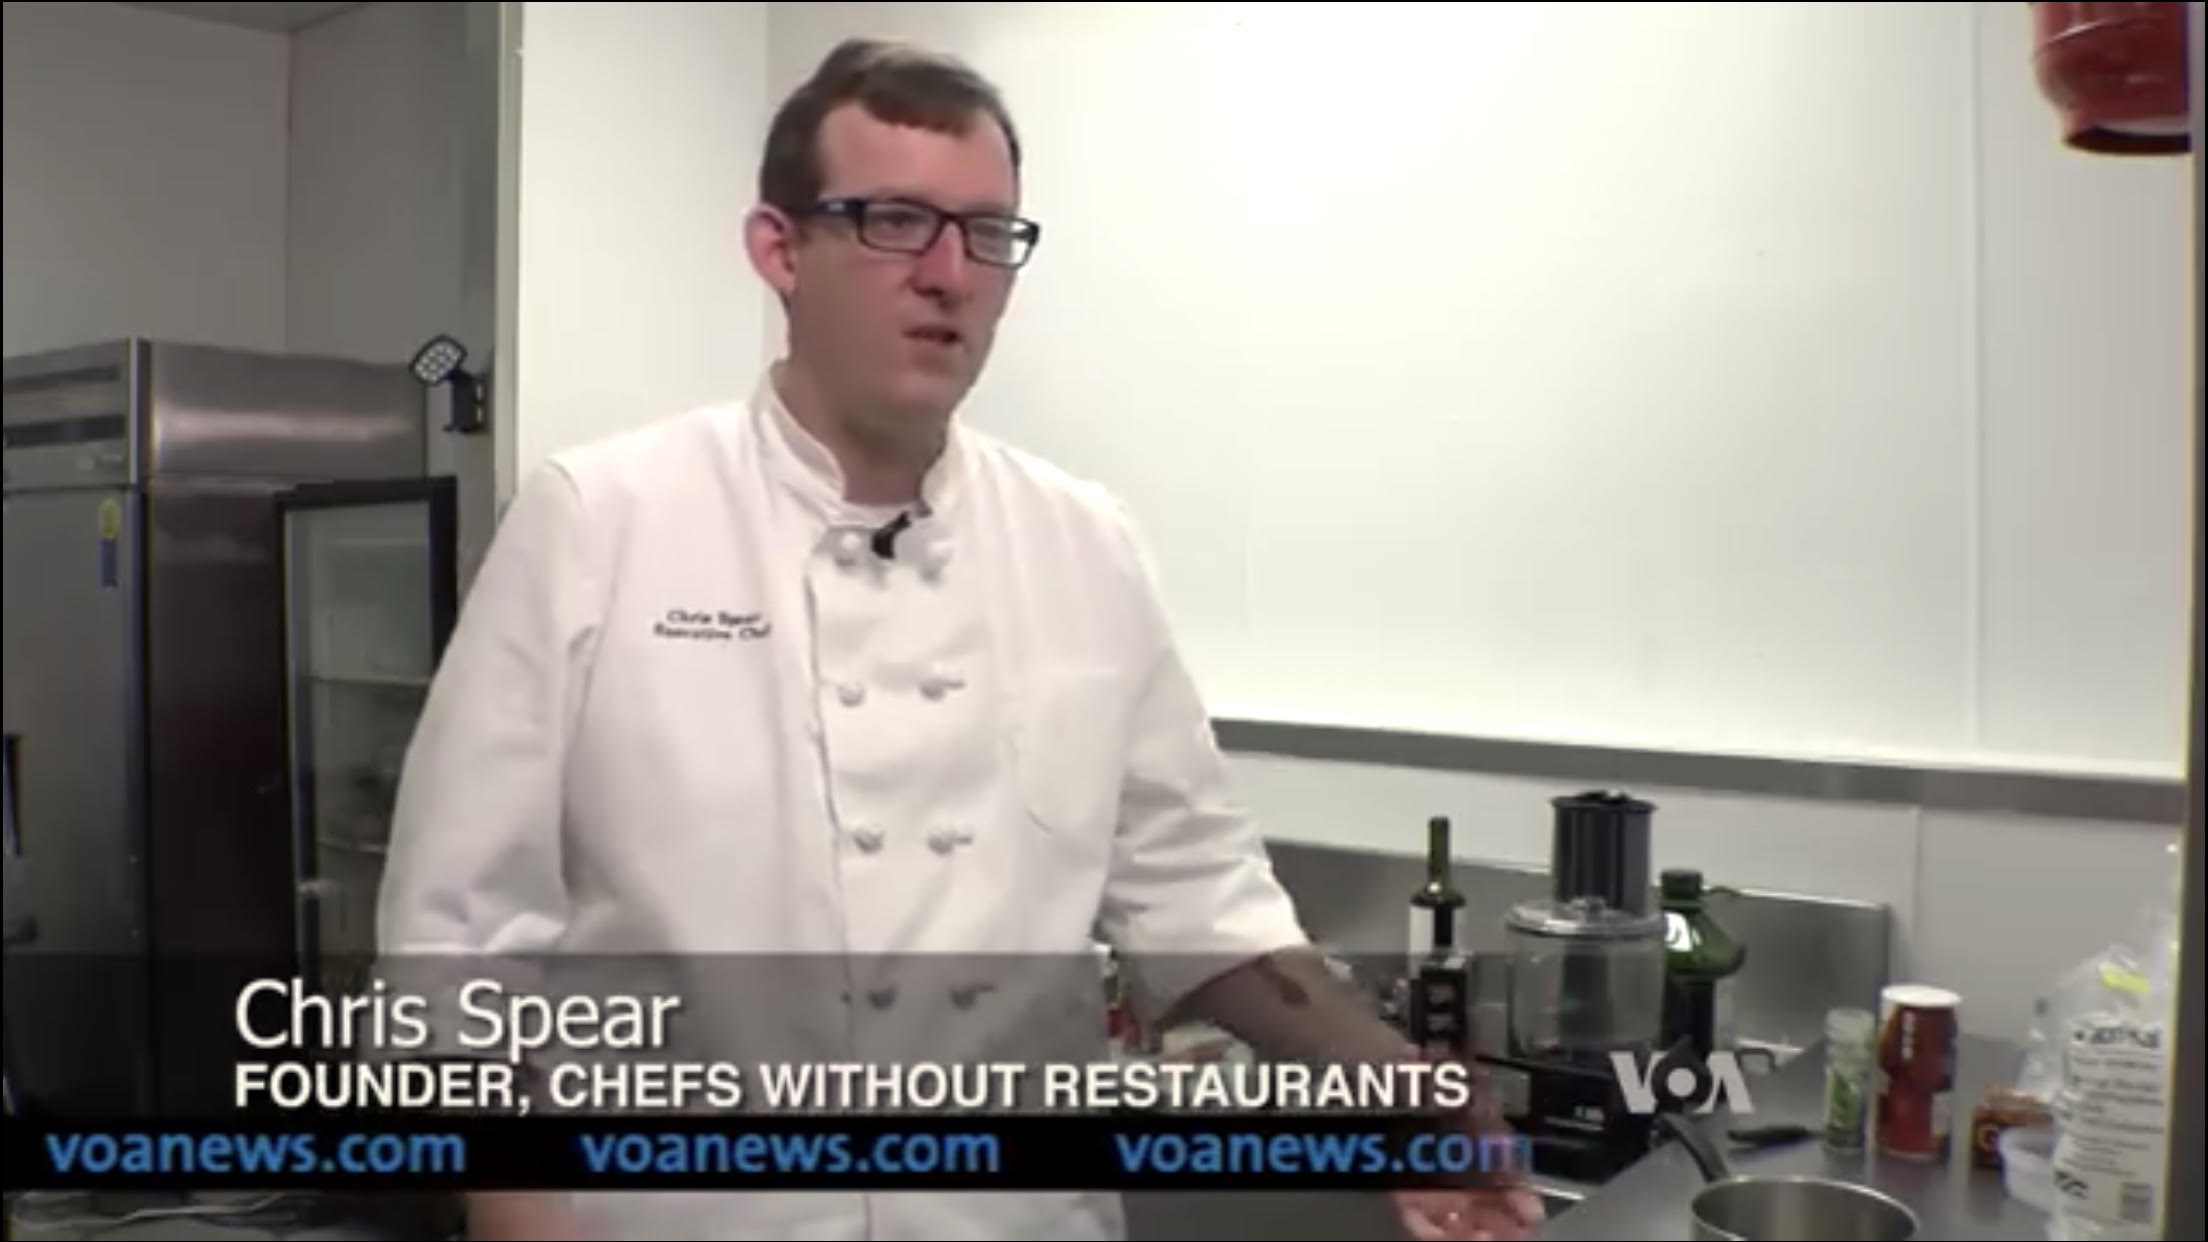 Chefs Without Restaurants Featured on Voice of America News